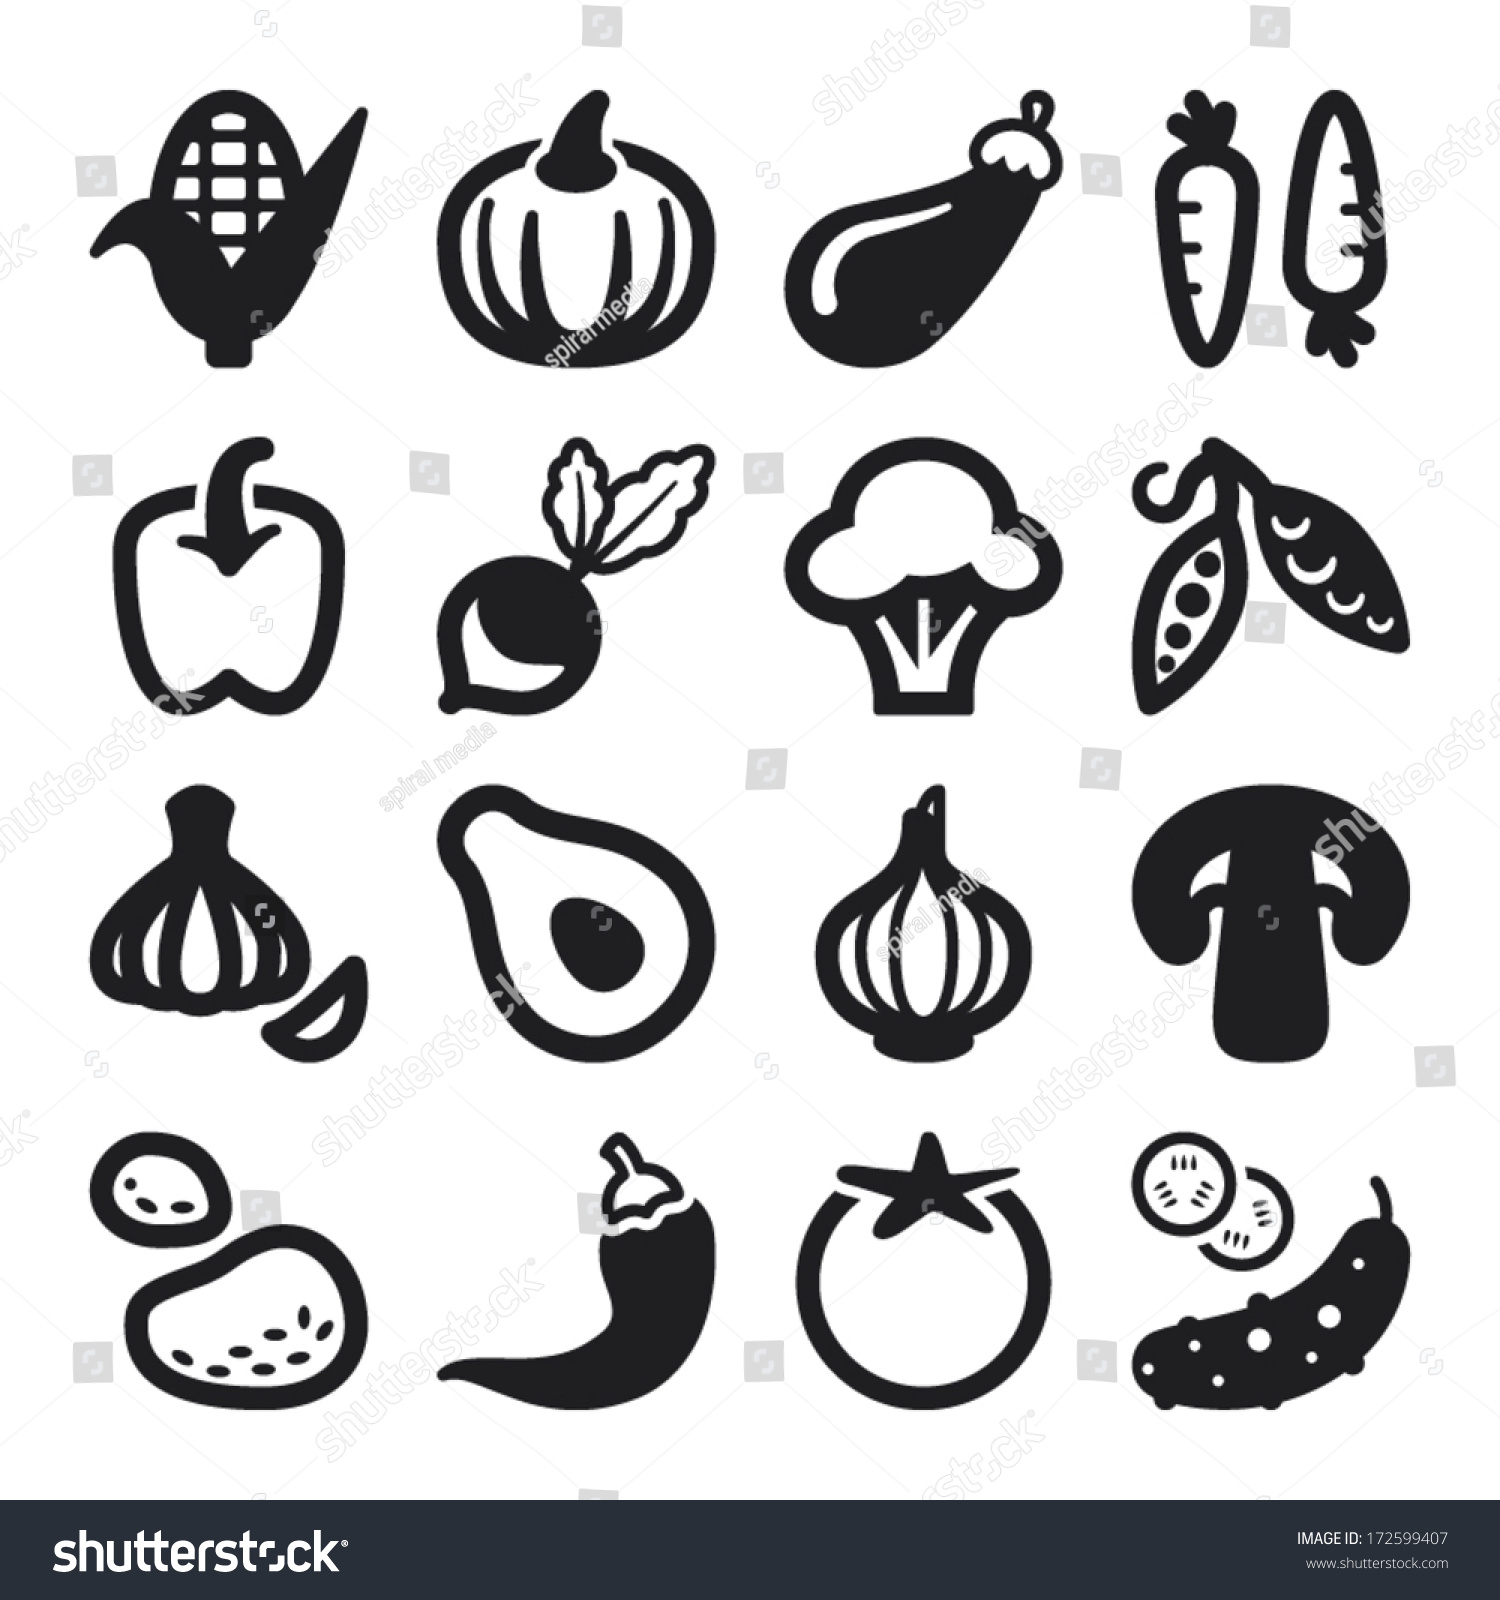 Set Of Black Flat Icons About Vegetables Stock Vector Illustration ...